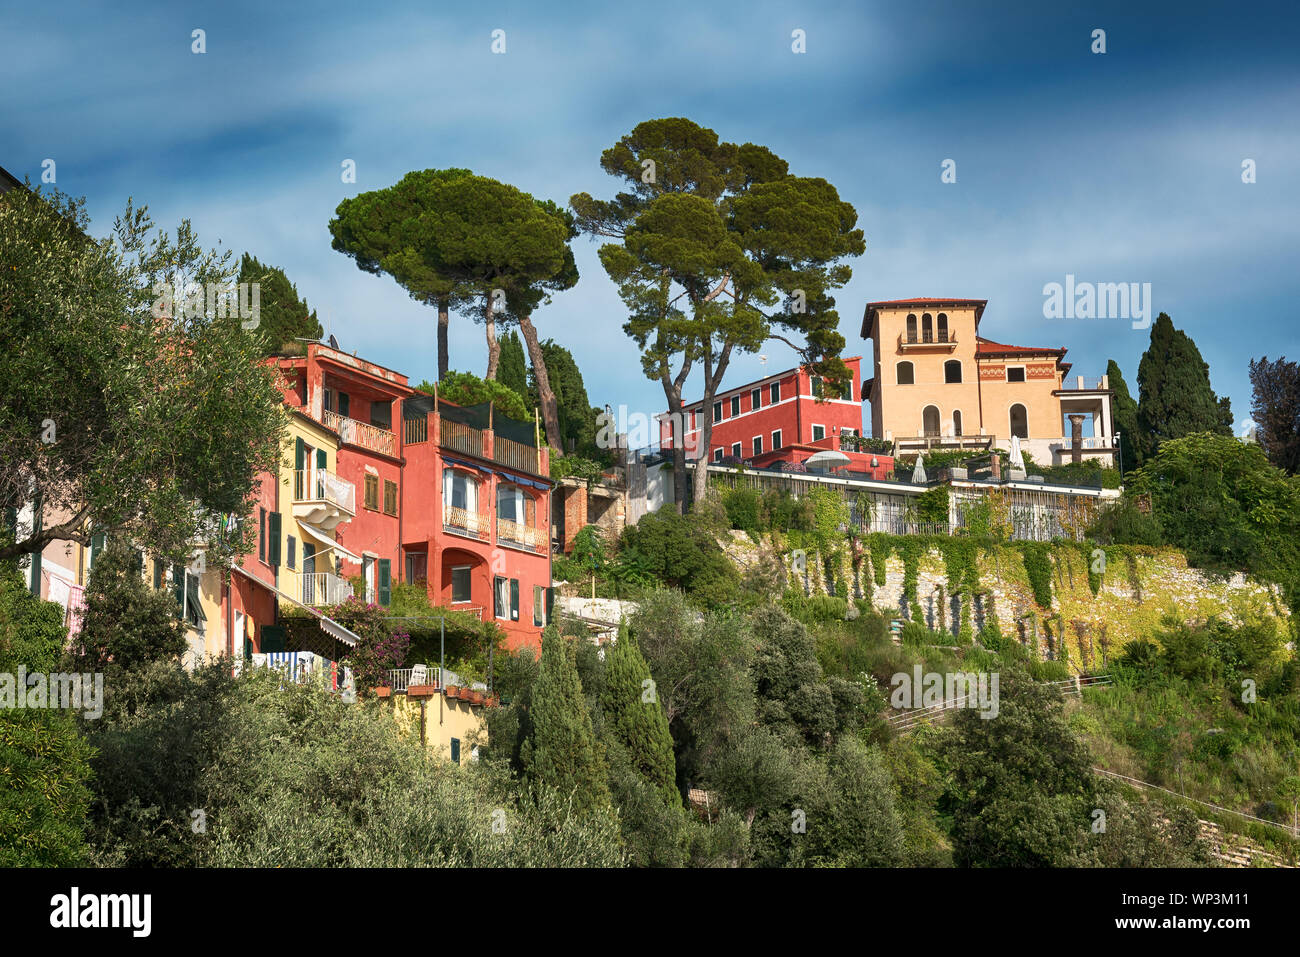 Colorful luxury villas in Lerici, Liguria, Italy on a steep cliff overlooking the Gulf of La Spezia viewed from below against a blue sky Stock Photo